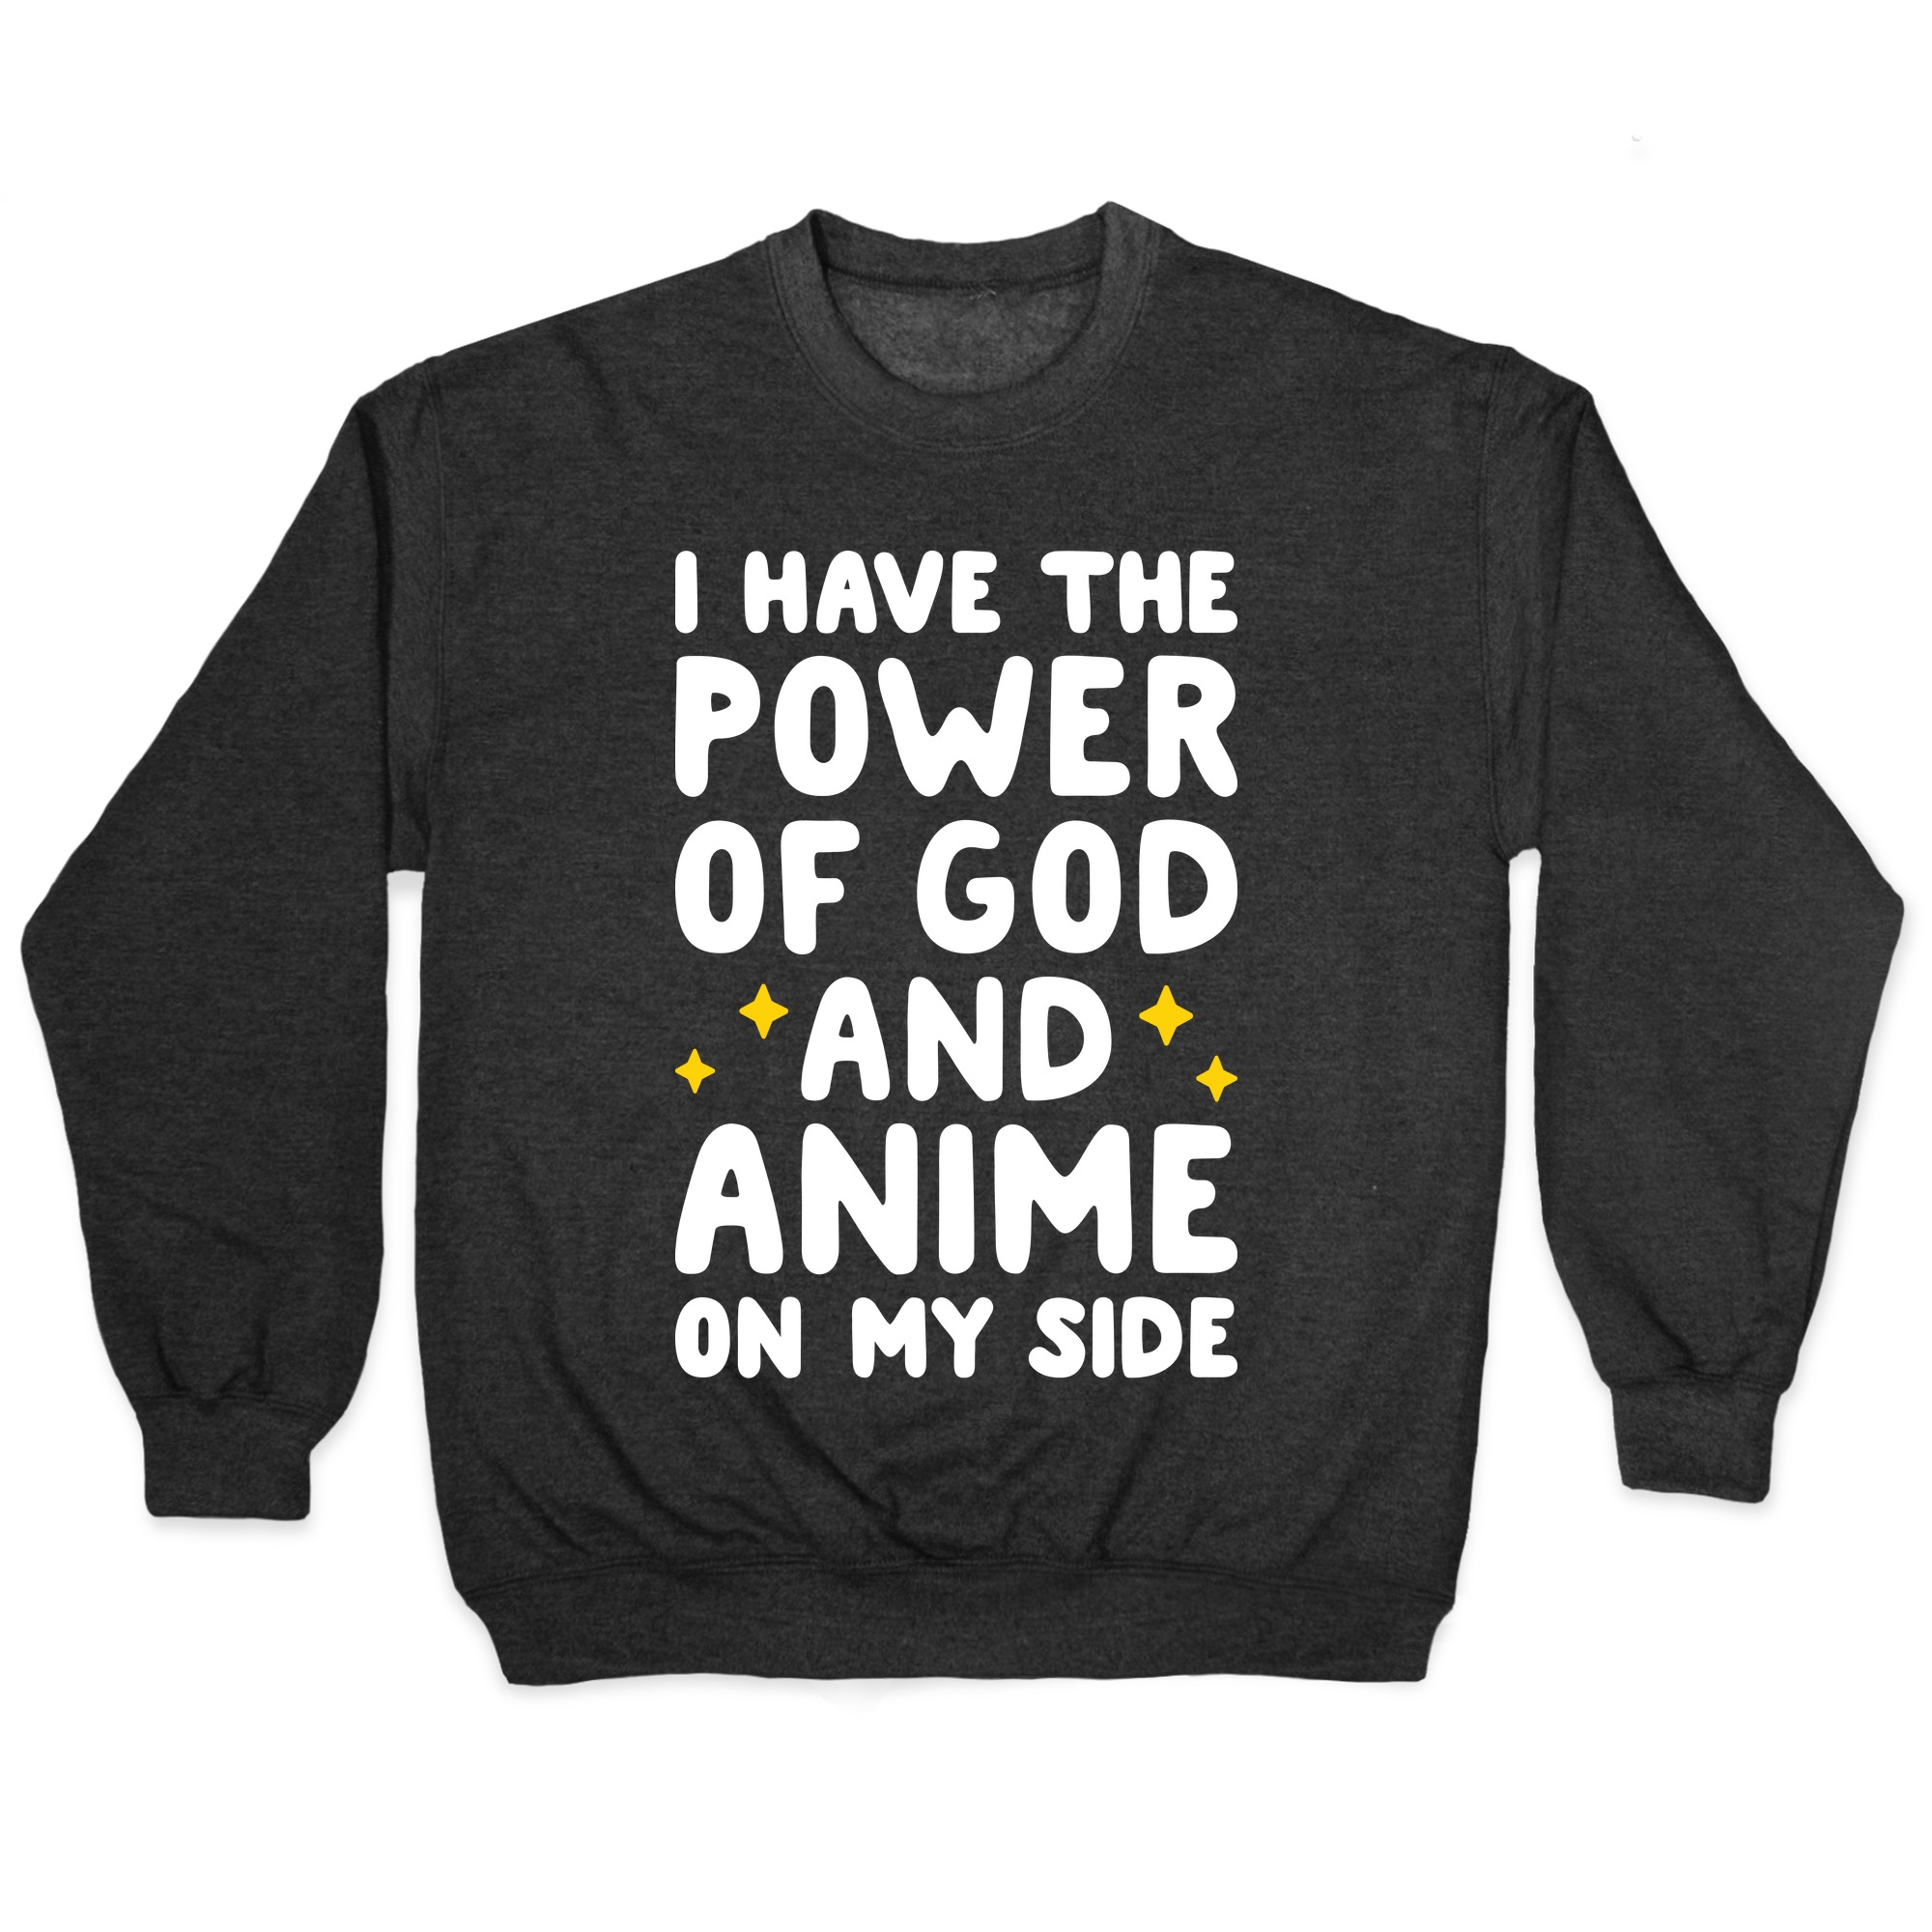 I Have The Power Of God And Anime On My Side Pullovers Lookhuman Almost like a scene from an anime, sicheng thought. i have the power of god and anime on my side pullovers lookhuman